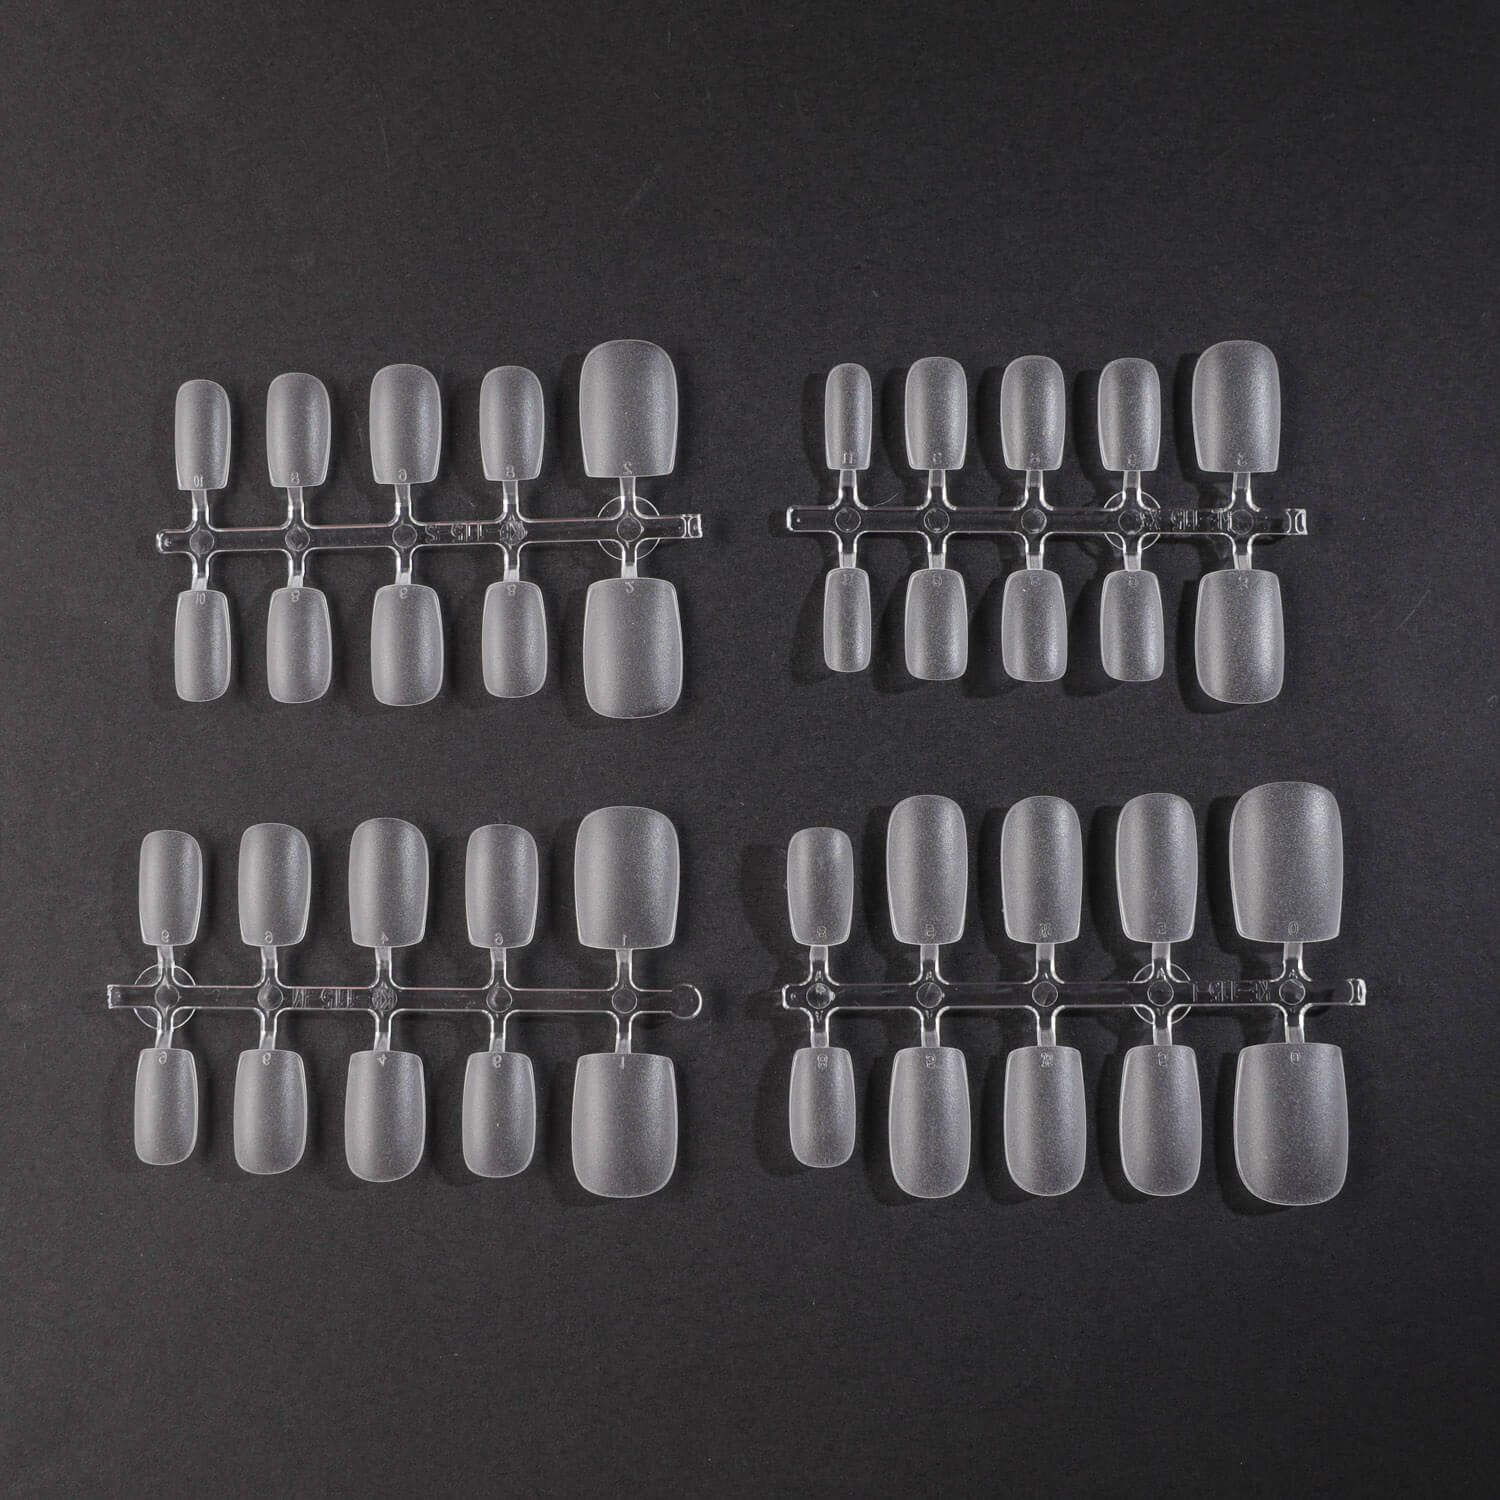 Blank Clear Nail Sizing kit- Almond, Coffin, Stiletto, Oval, Square, Squoval, Long nail, Short nail